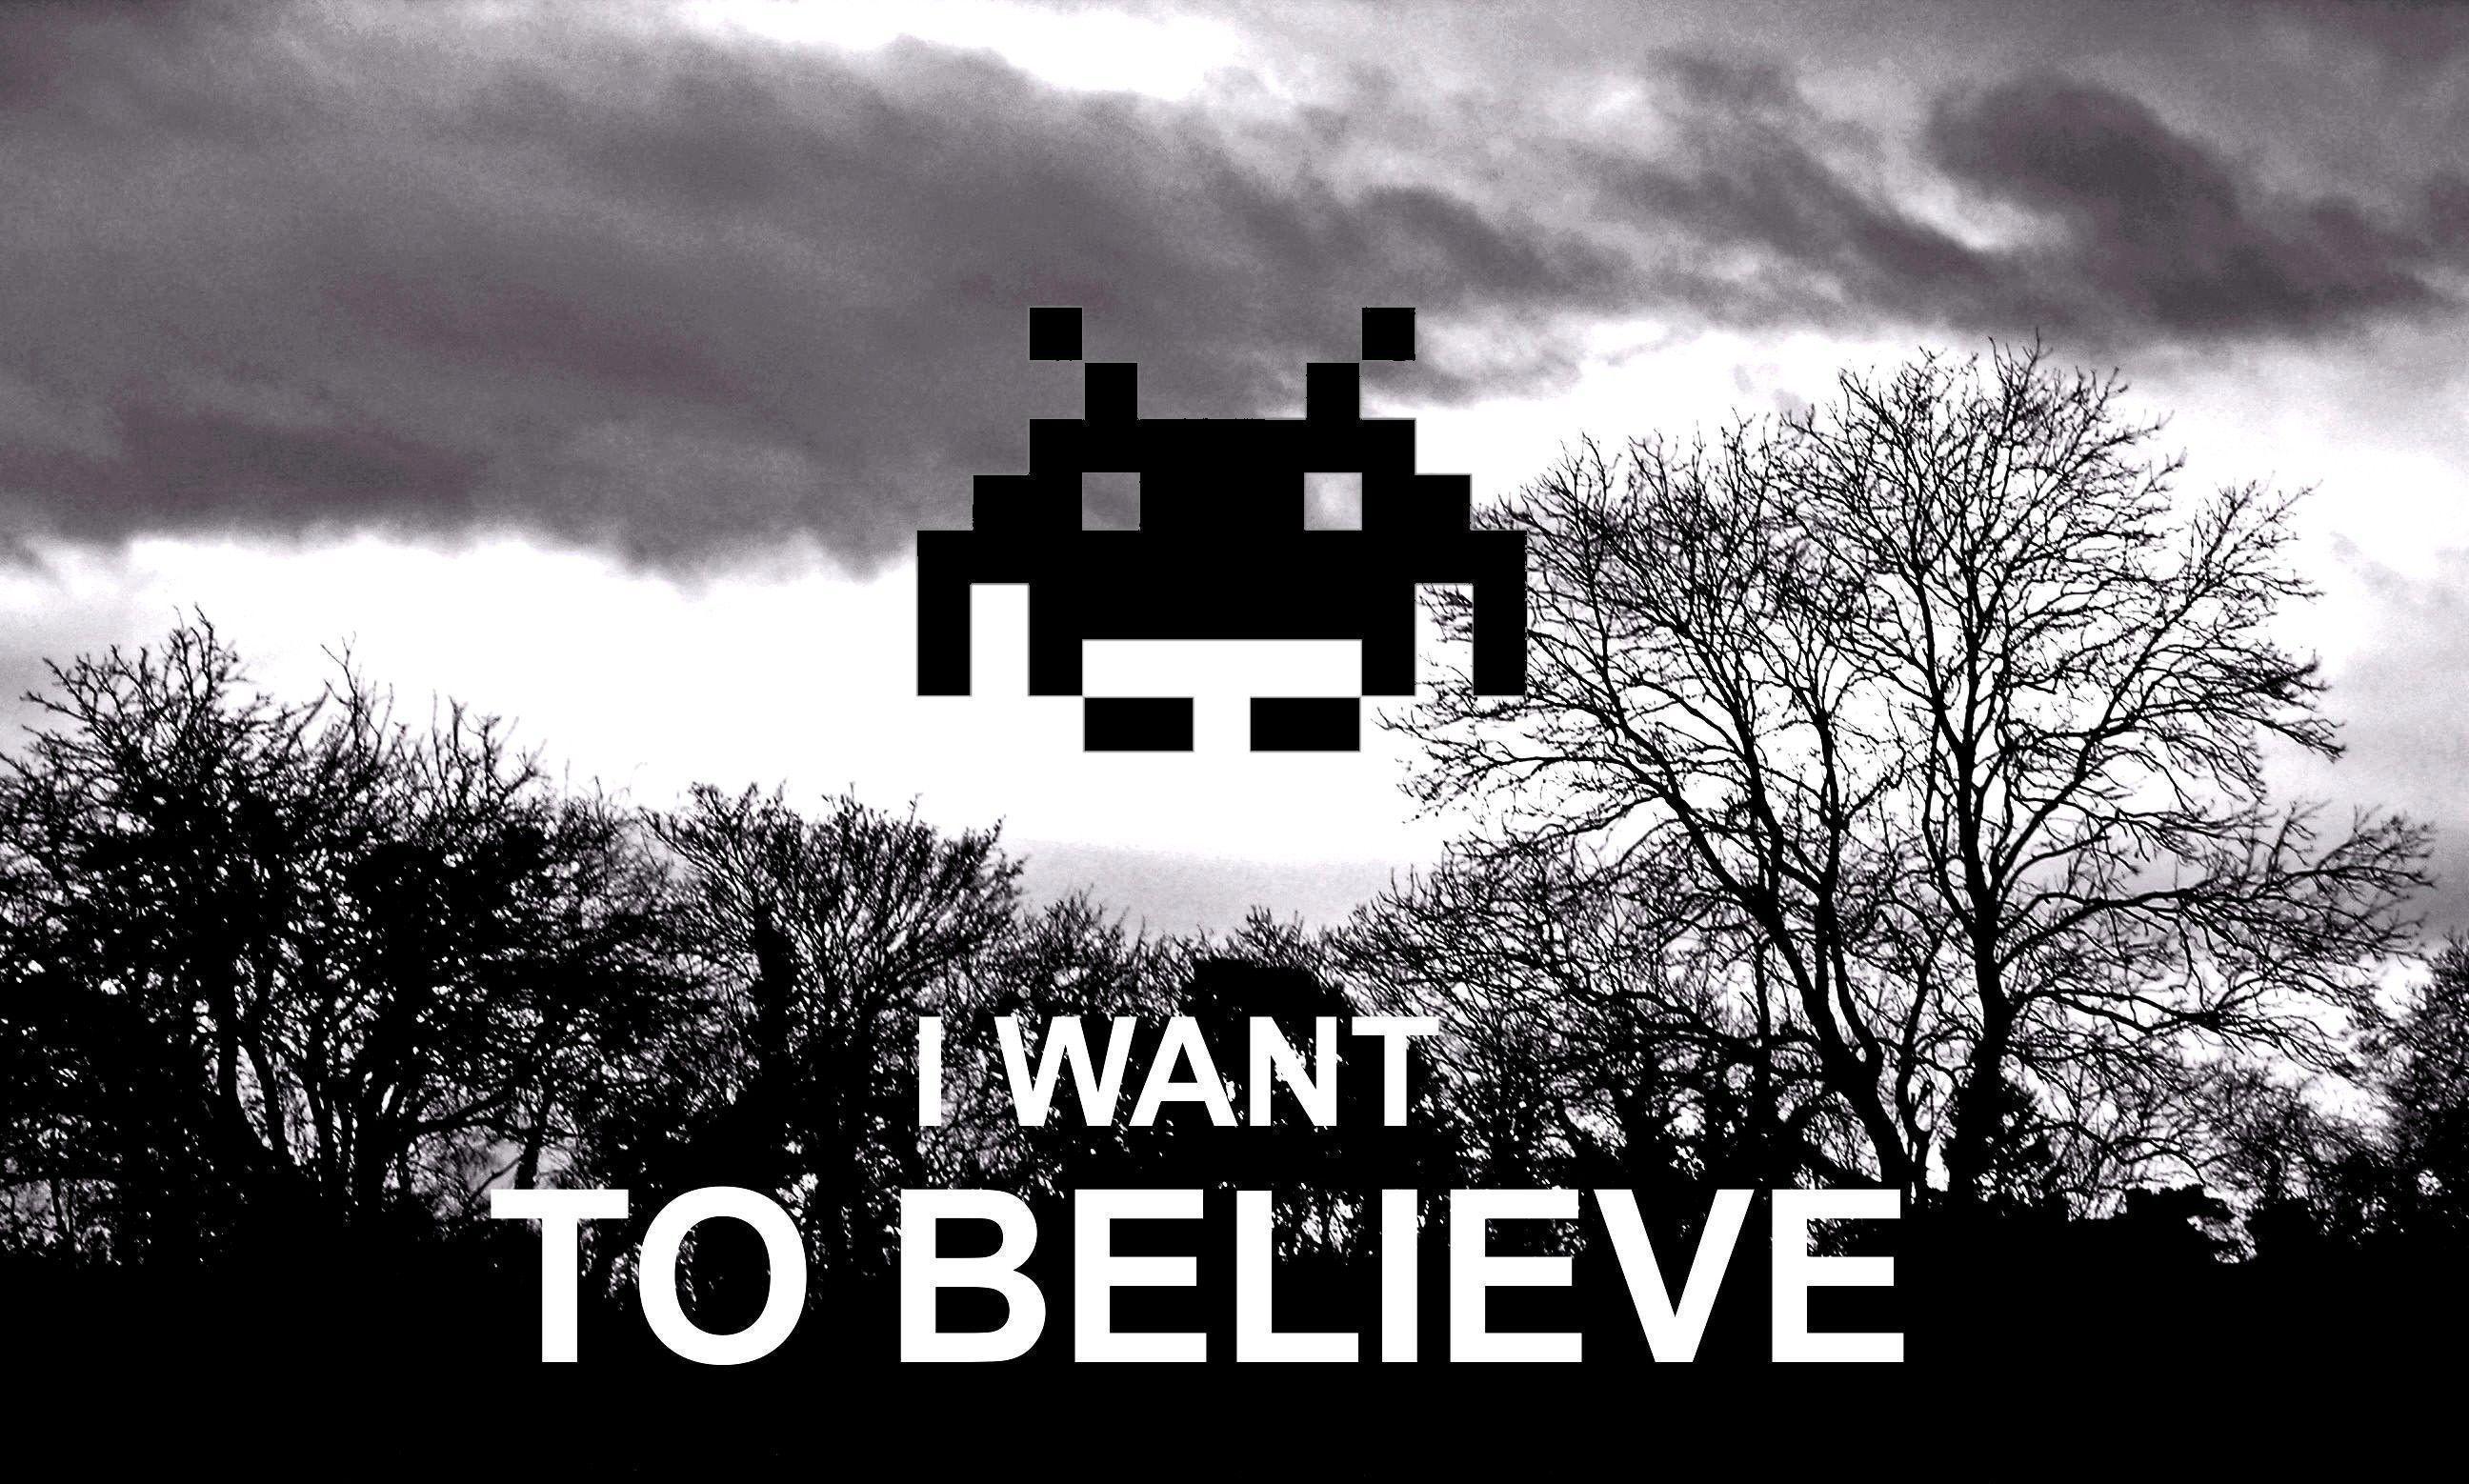 Space Invader wallpapers and image